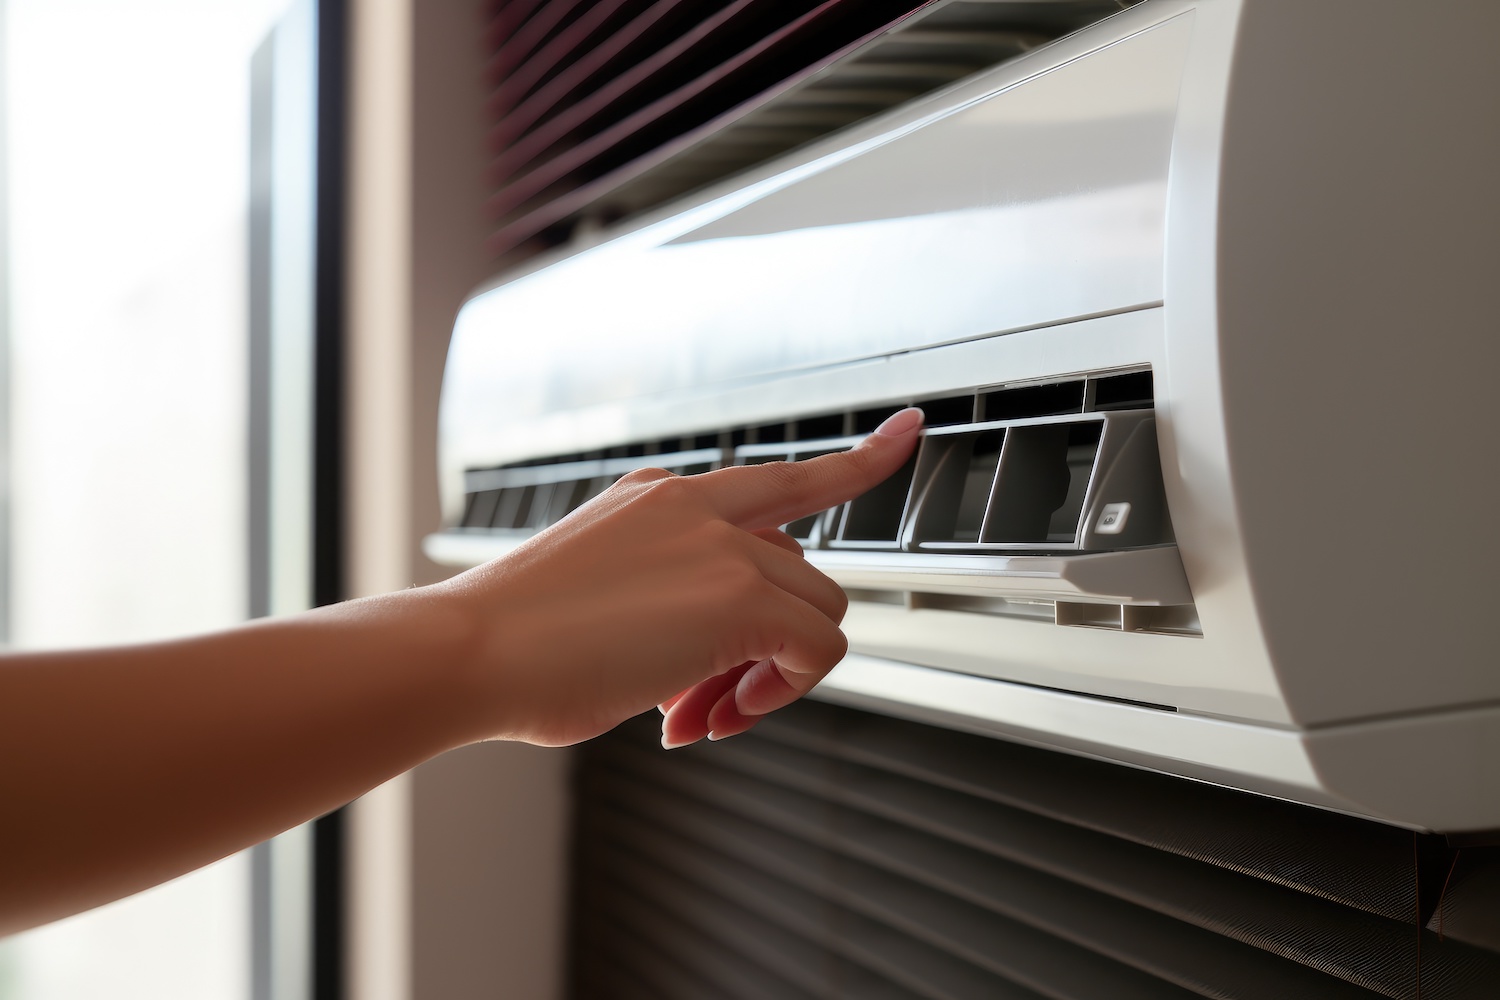 What size air conditioning do I need?